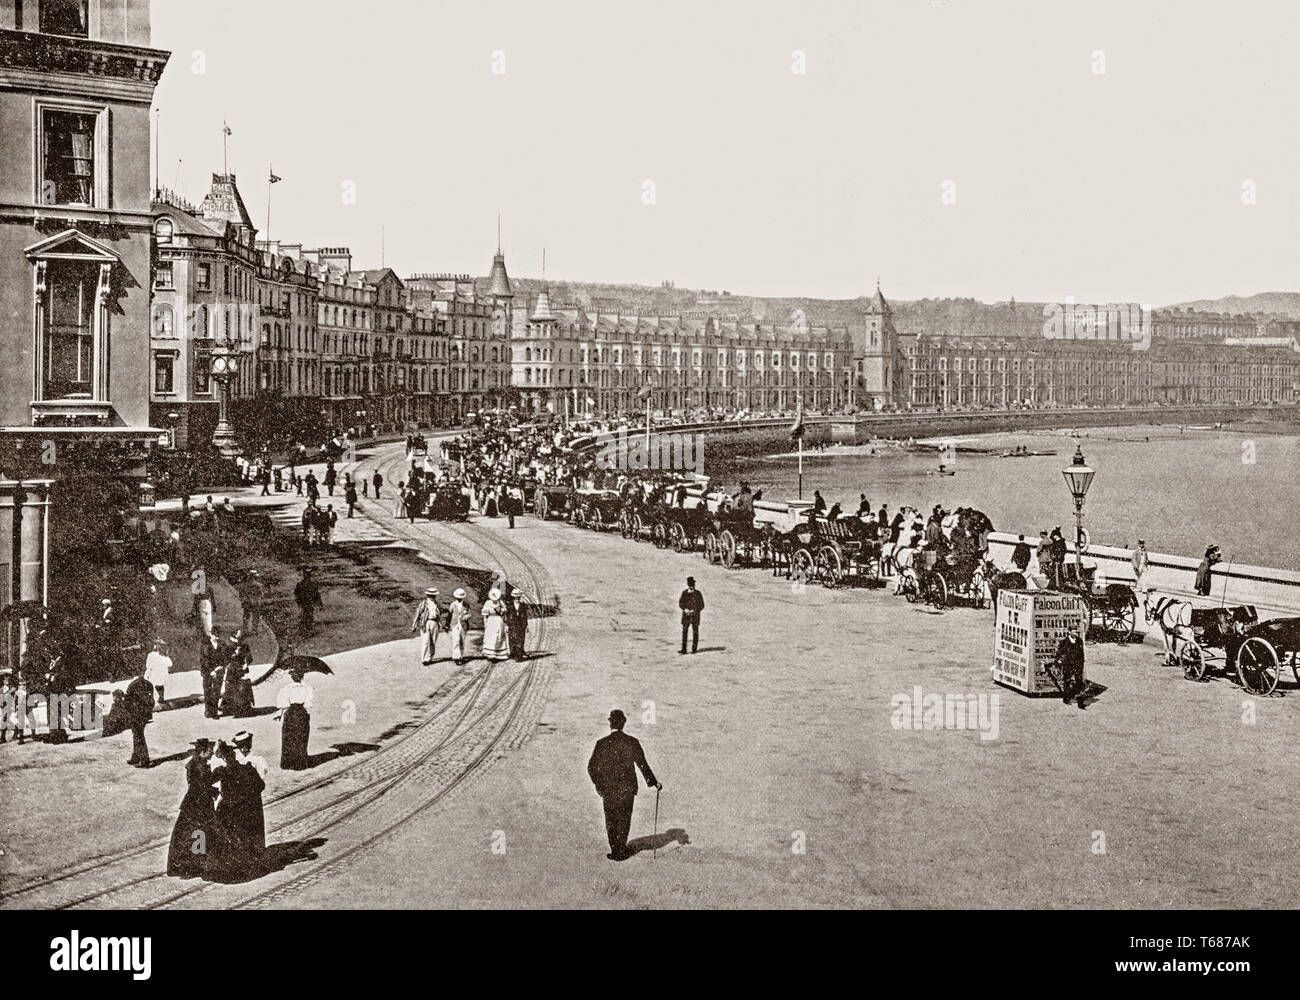 Late 19th Century views of  the busy Loch Promenade that runs nearly the entire length of beachfront in Douglas was constructed in 1878. Douglas is the capital, main commercial port and largest town of the Isle of Man,It grew rapidly as a result of links with the English port of Liverpool in the 18th century. It became a major tourist destination following the formation of the Isle of Man Steam Packet Company in 1830, which  led to greatly improved services, and also laid the foundations for growth in both cargo and tourist traffic. Stock Photo